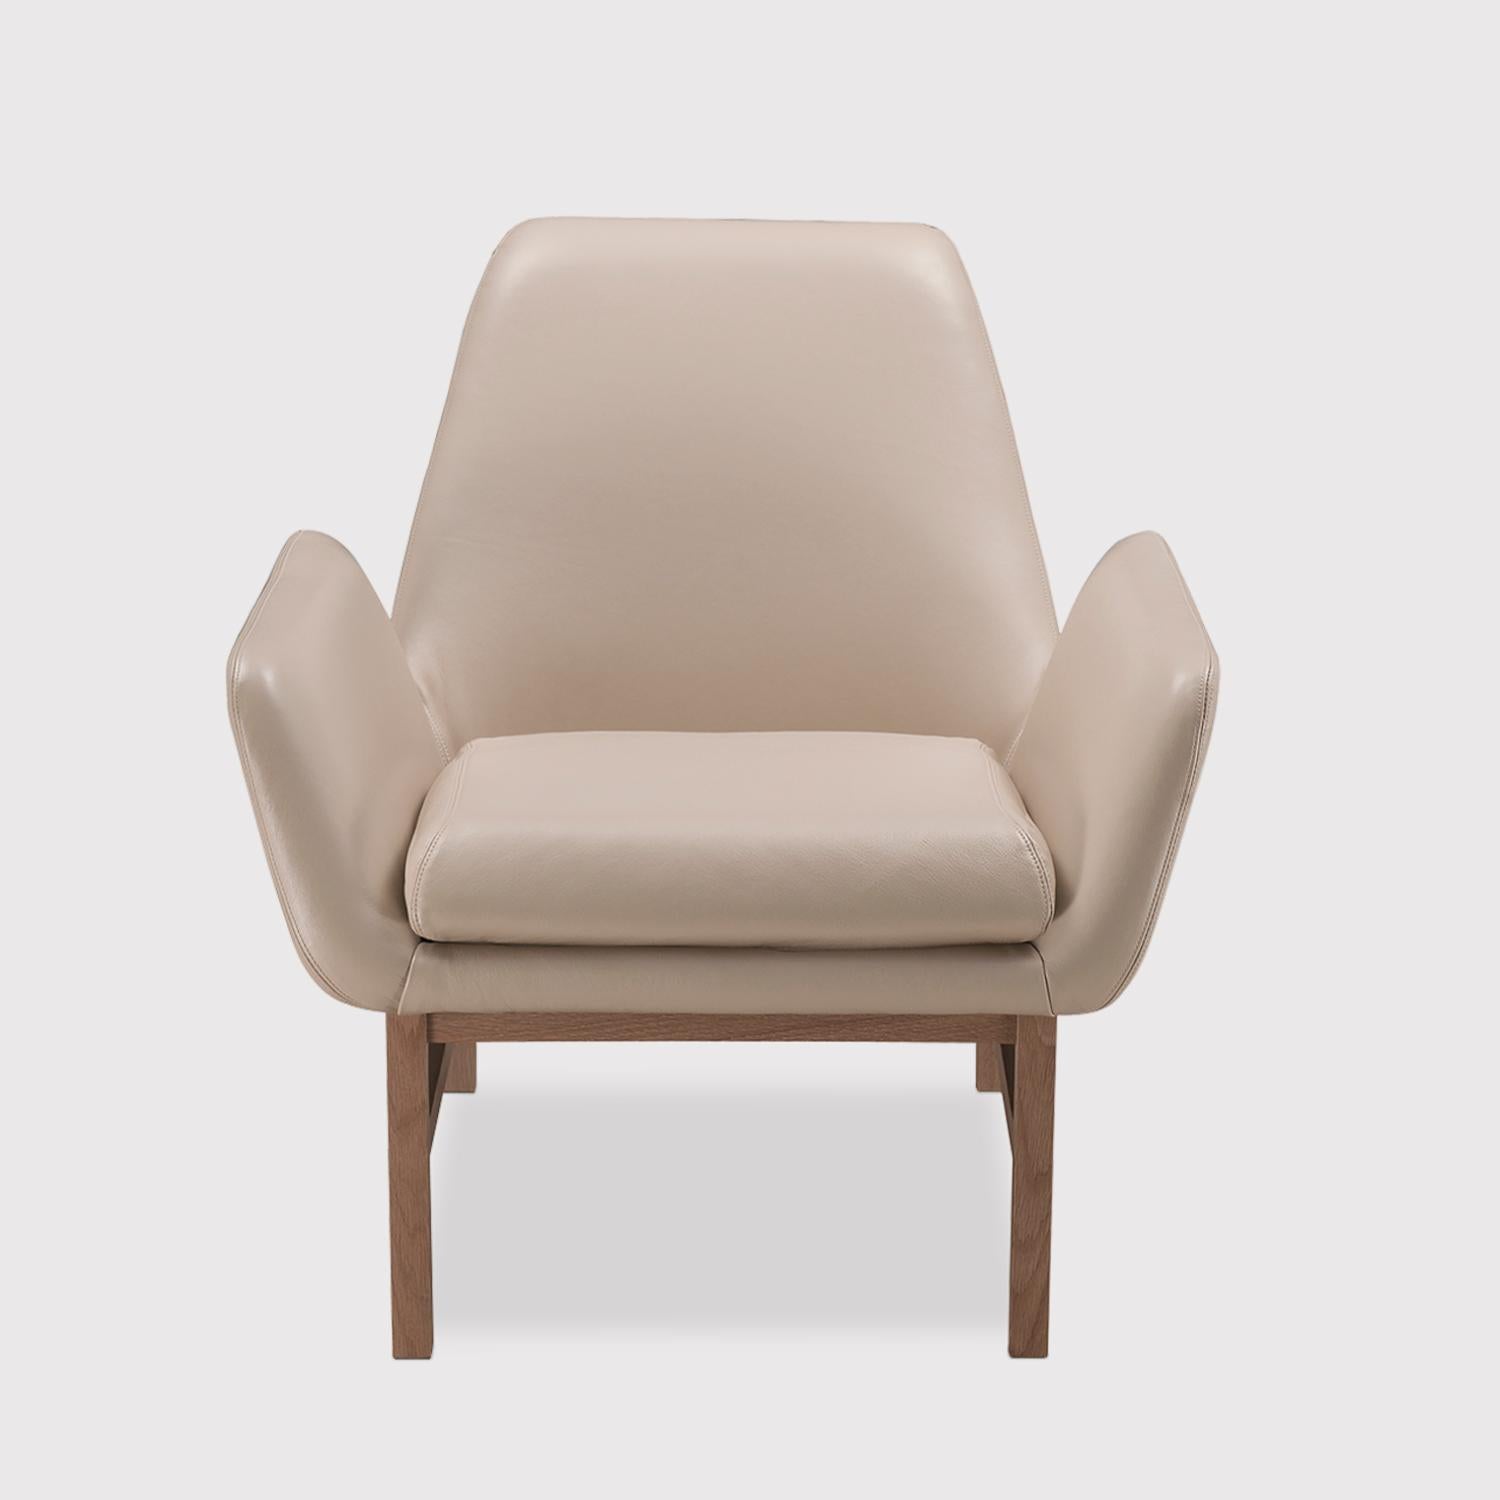 A solid timber base, rigorous in construction cradles an upholstered seat; the design reminiscent of Nordic aesthetic.

Finishes timber: Natural oak, chalk oak, mocca oak, carbon oak, natural ash, carbon ash, walnut.

Finishes leather: A